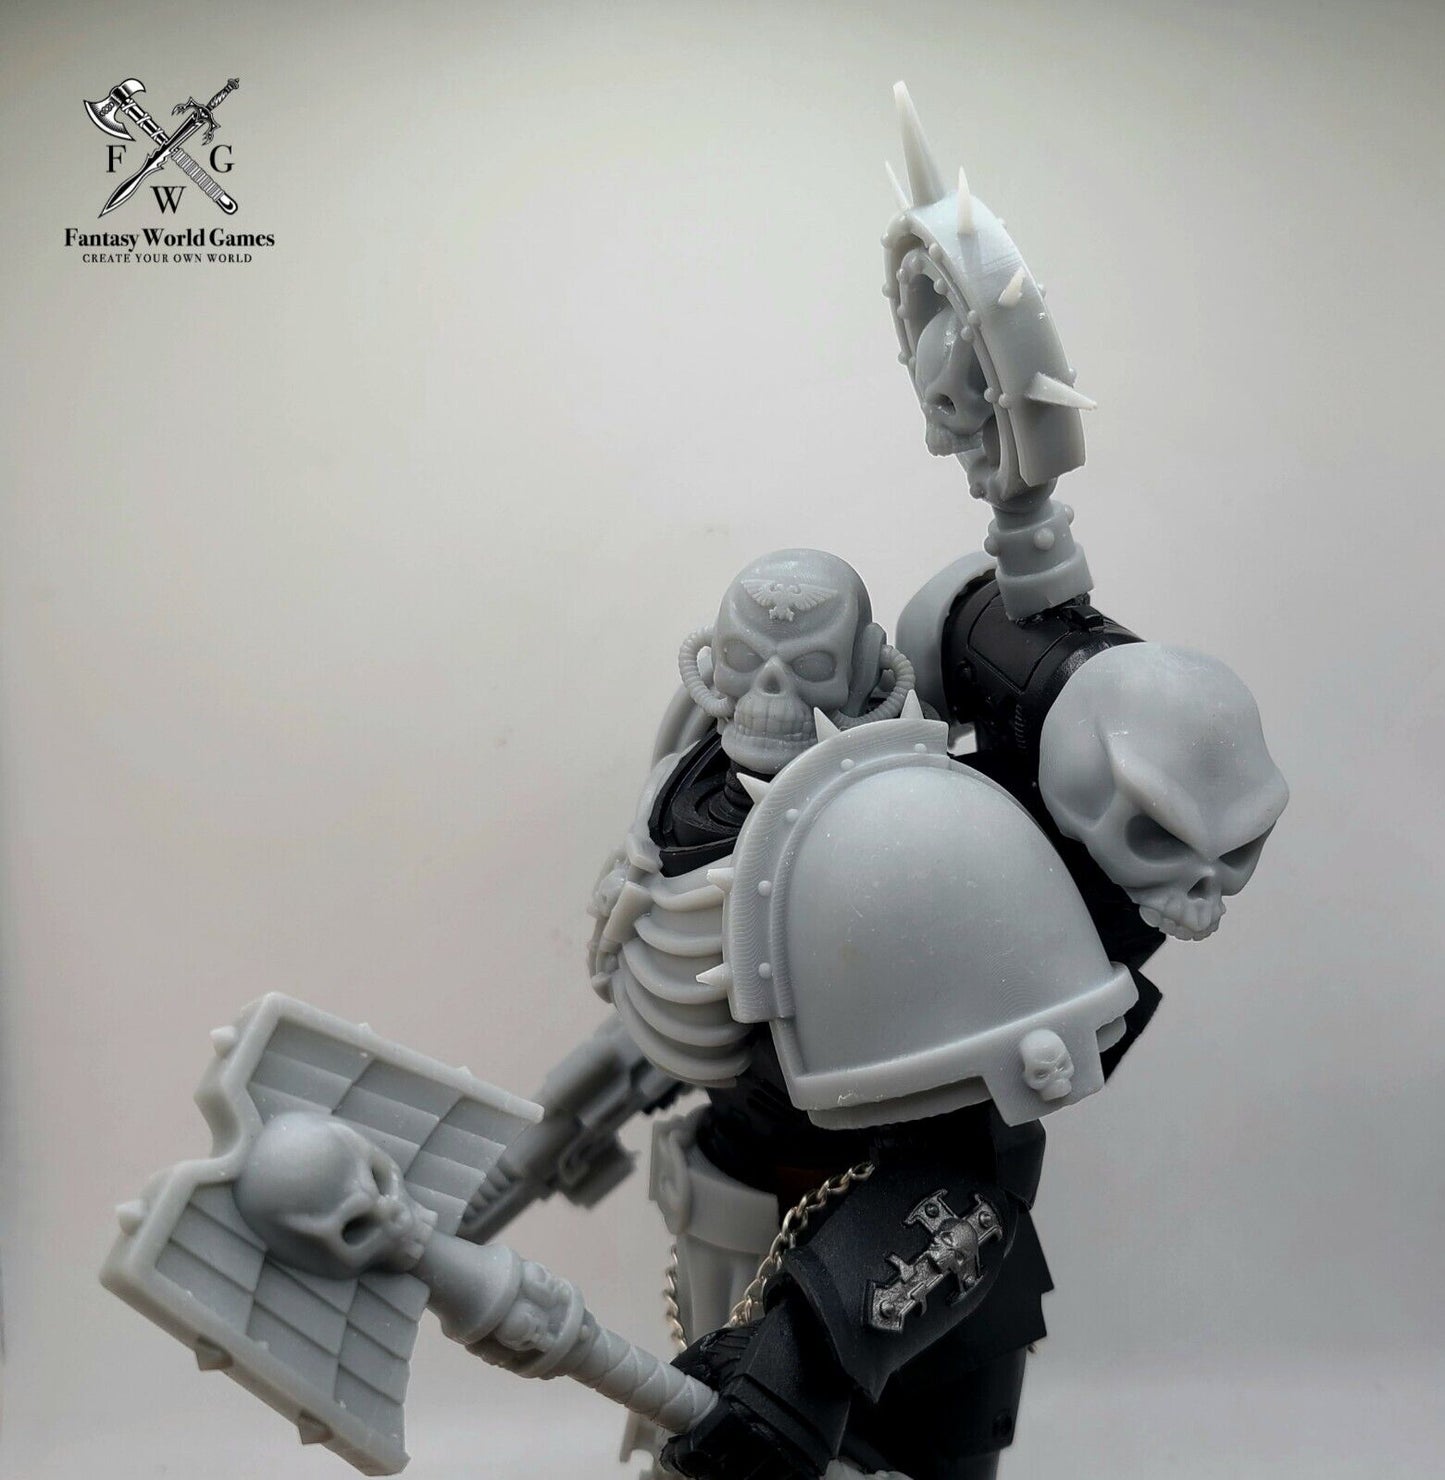 Chaplain Space Marine Full Upgrade Multipart Kit Character Loadout Compatible with McFarlane Toys Space Marine Action Figures